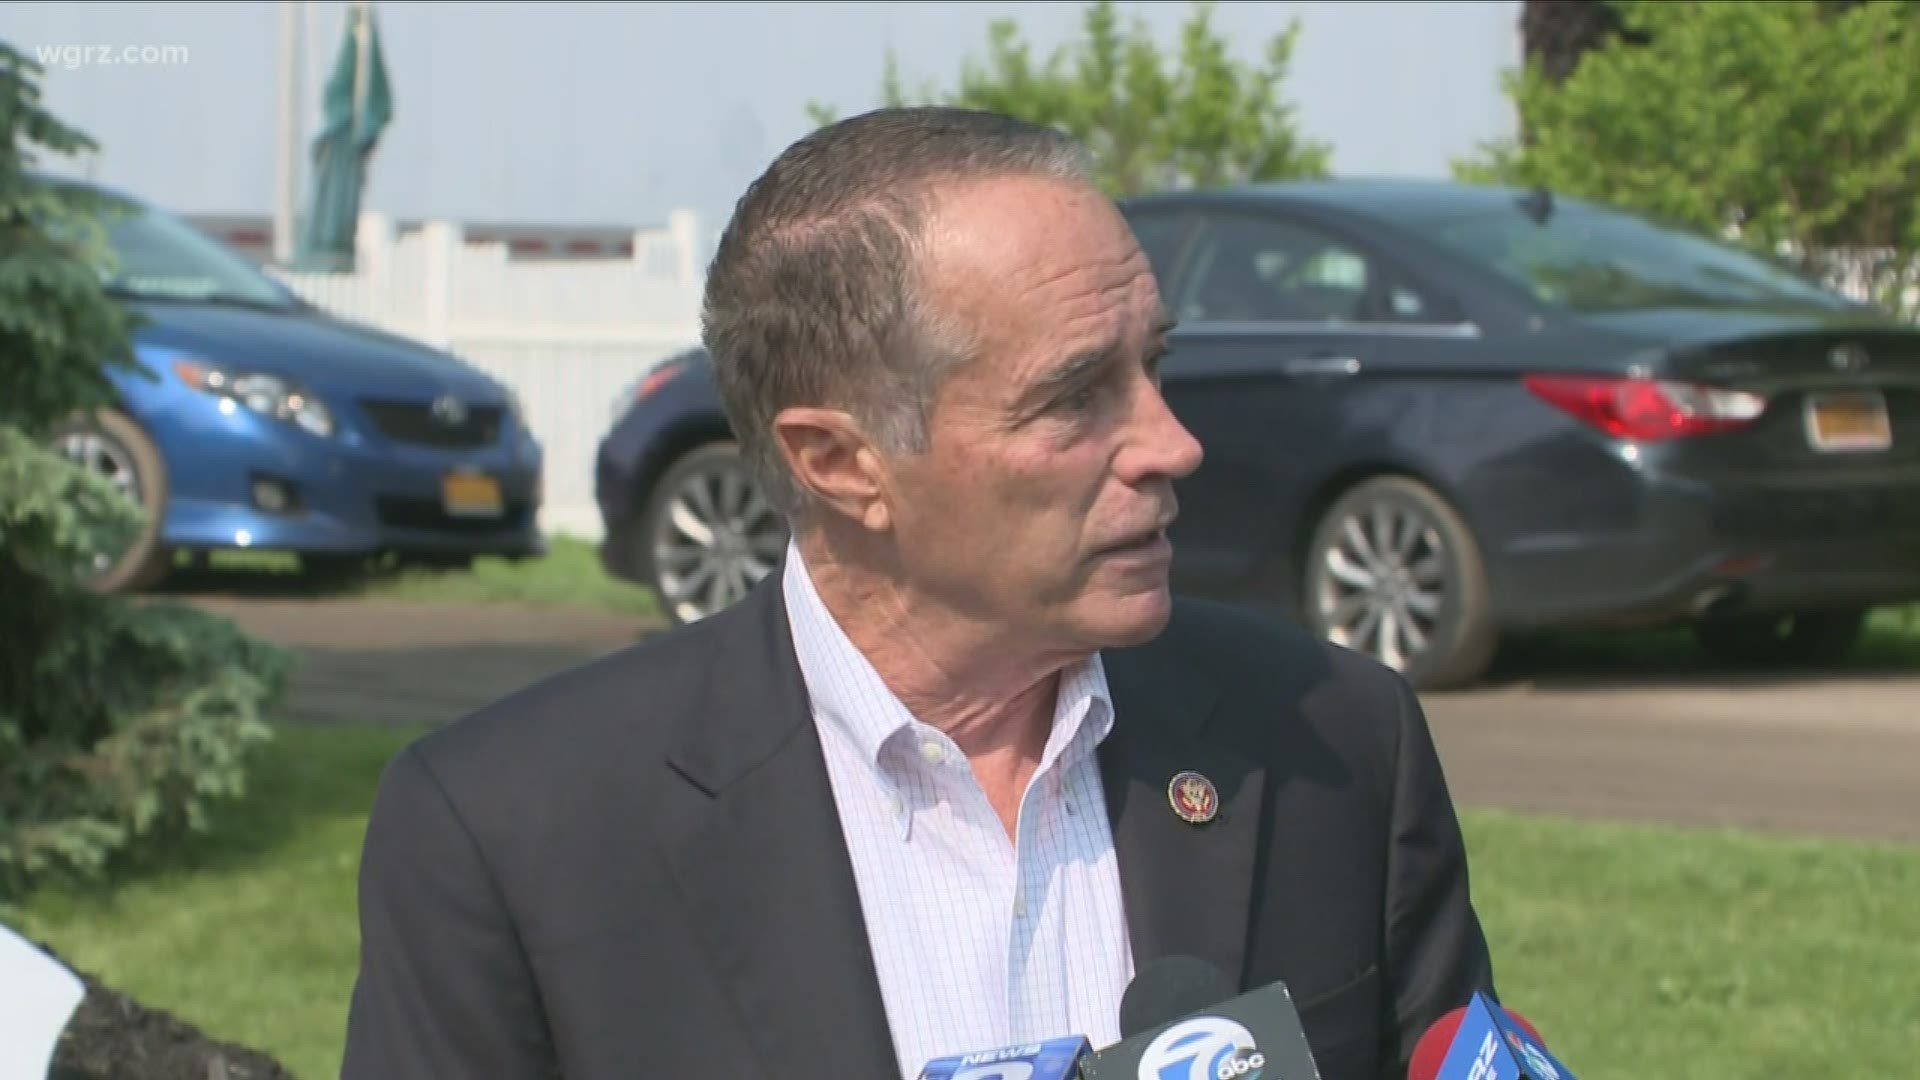 Congressman Chris Collins has introduced new legislation that would punish states like New York that allow undocumented immigrants to get drivers licenses.